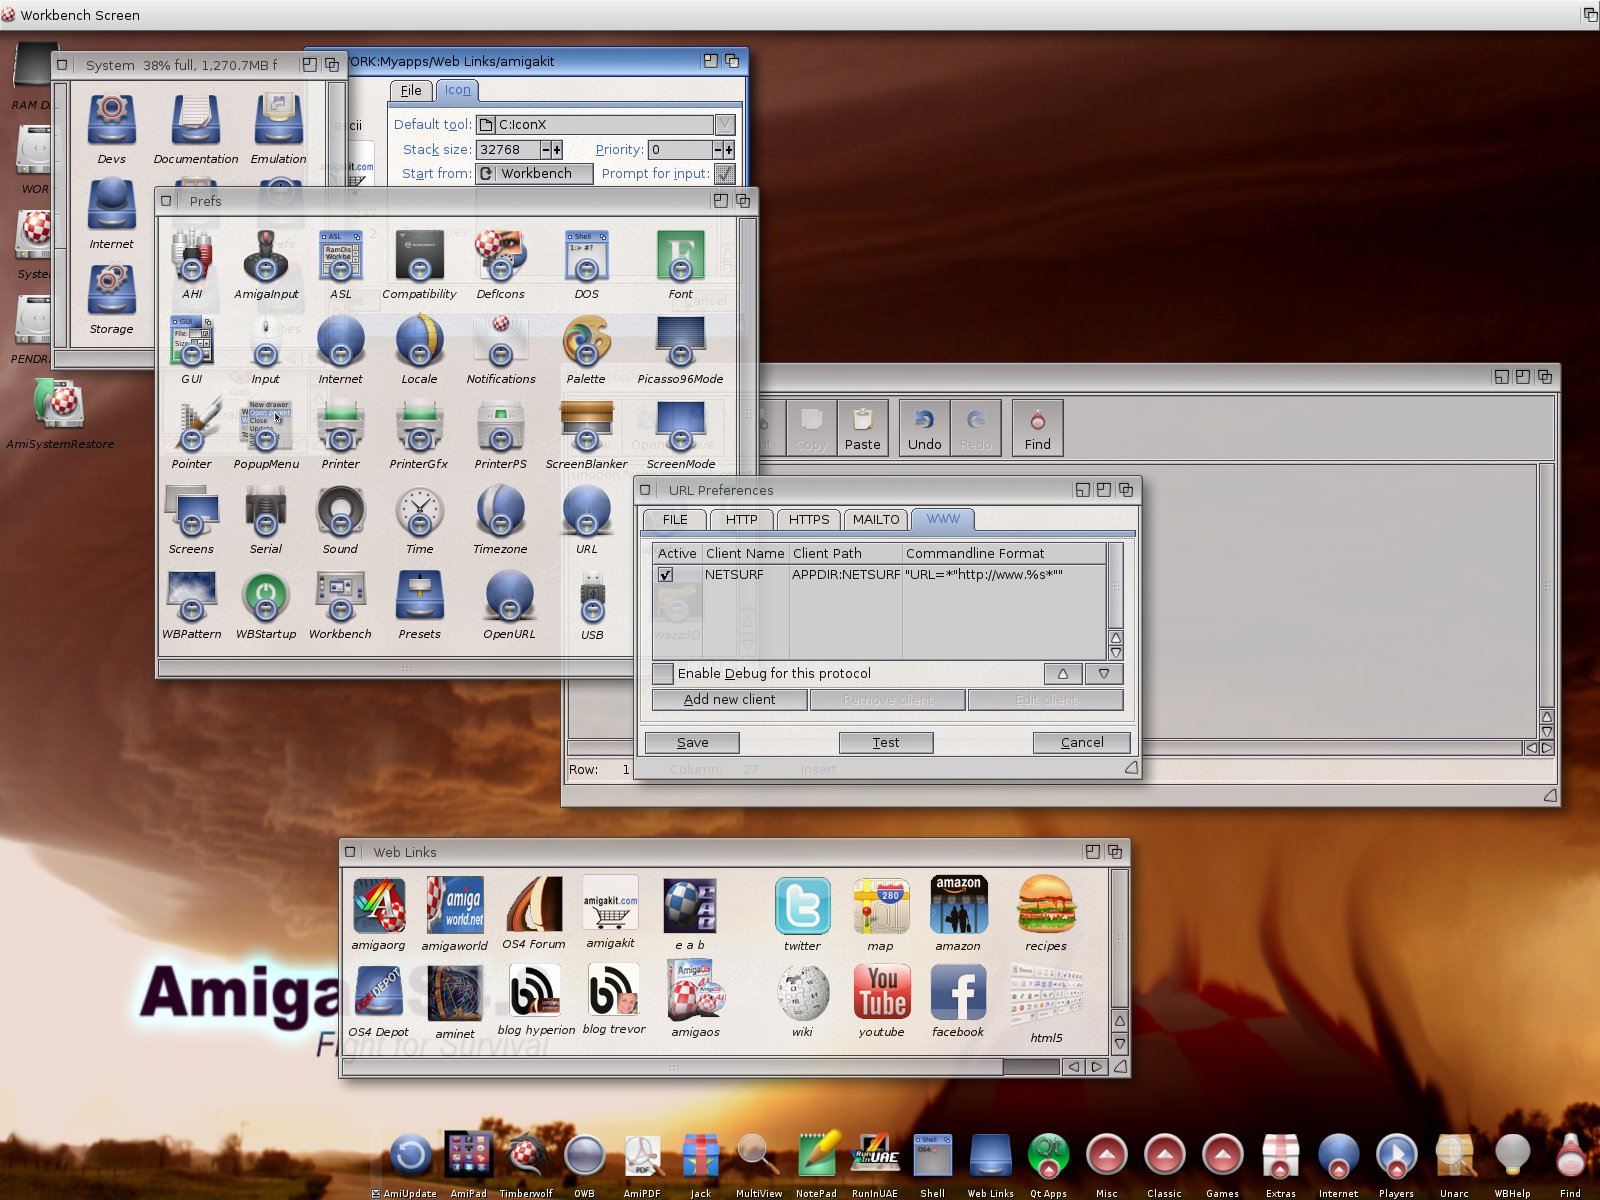 amigaos 4.1 final edition classic iso